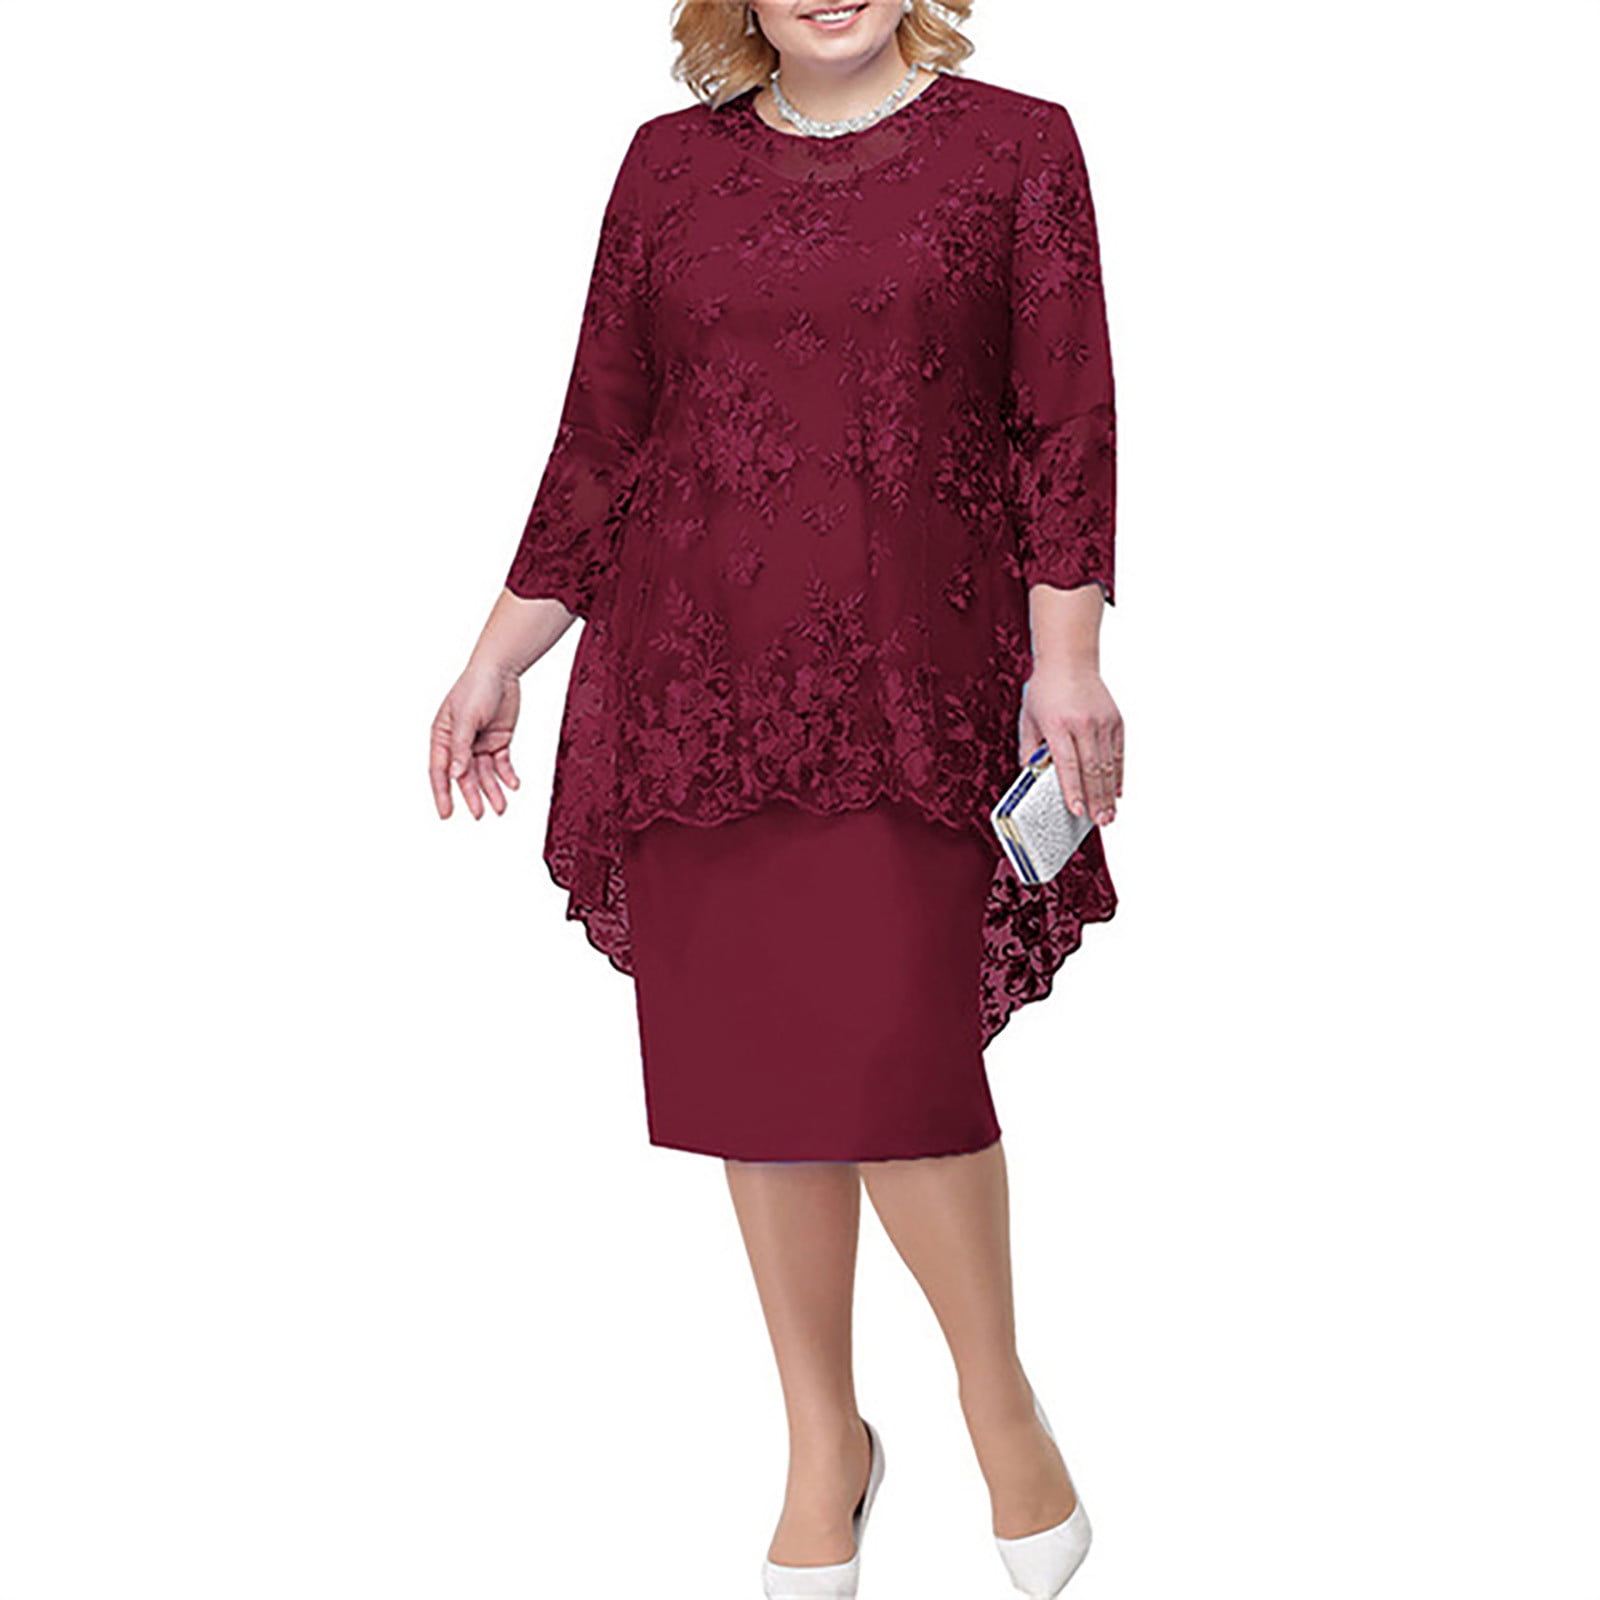 2 Piece Dress Set for Women Plus Size Party Midi Dresses & Embroidered ...